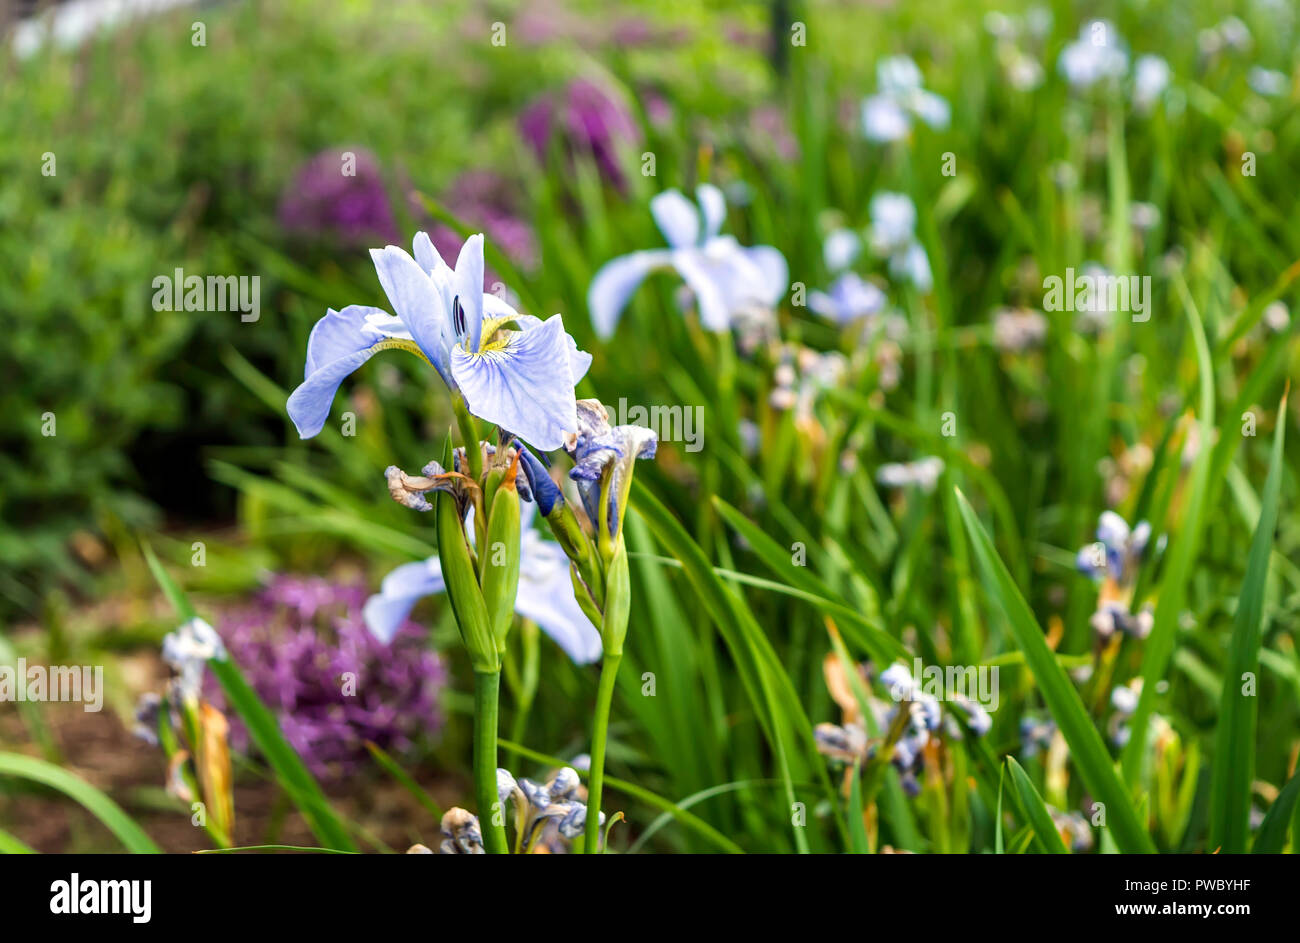 Flowering blue Iris flower in the meadow. Named after the Greek goddess of the rainbow, irises bring color to the garden and parks in spring and summe Stock Photo